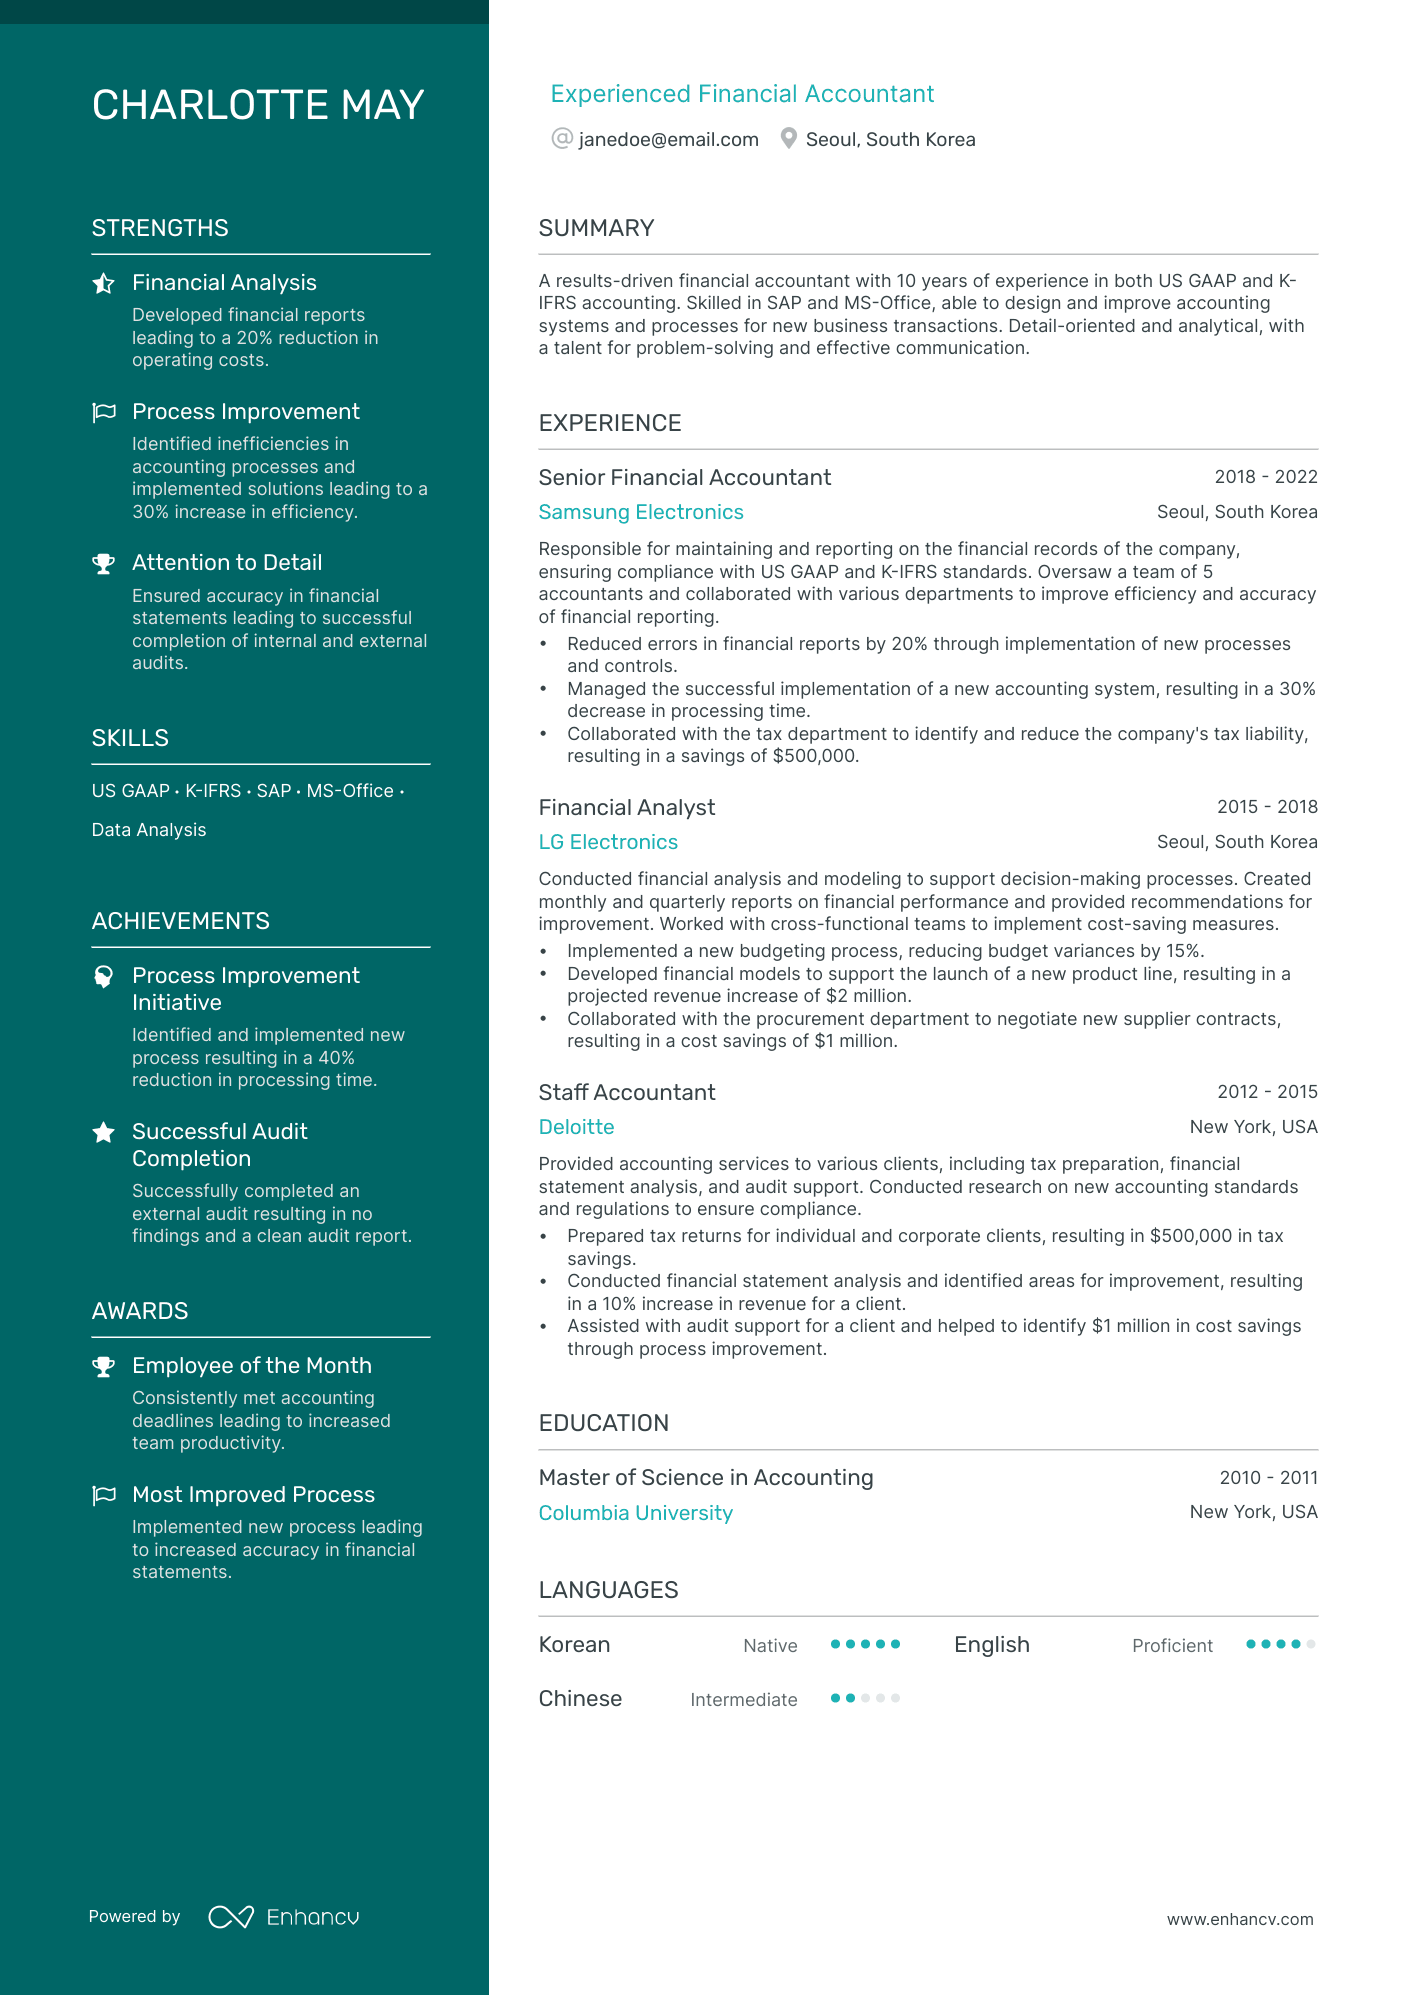 Experienced Financial Accountant resume example